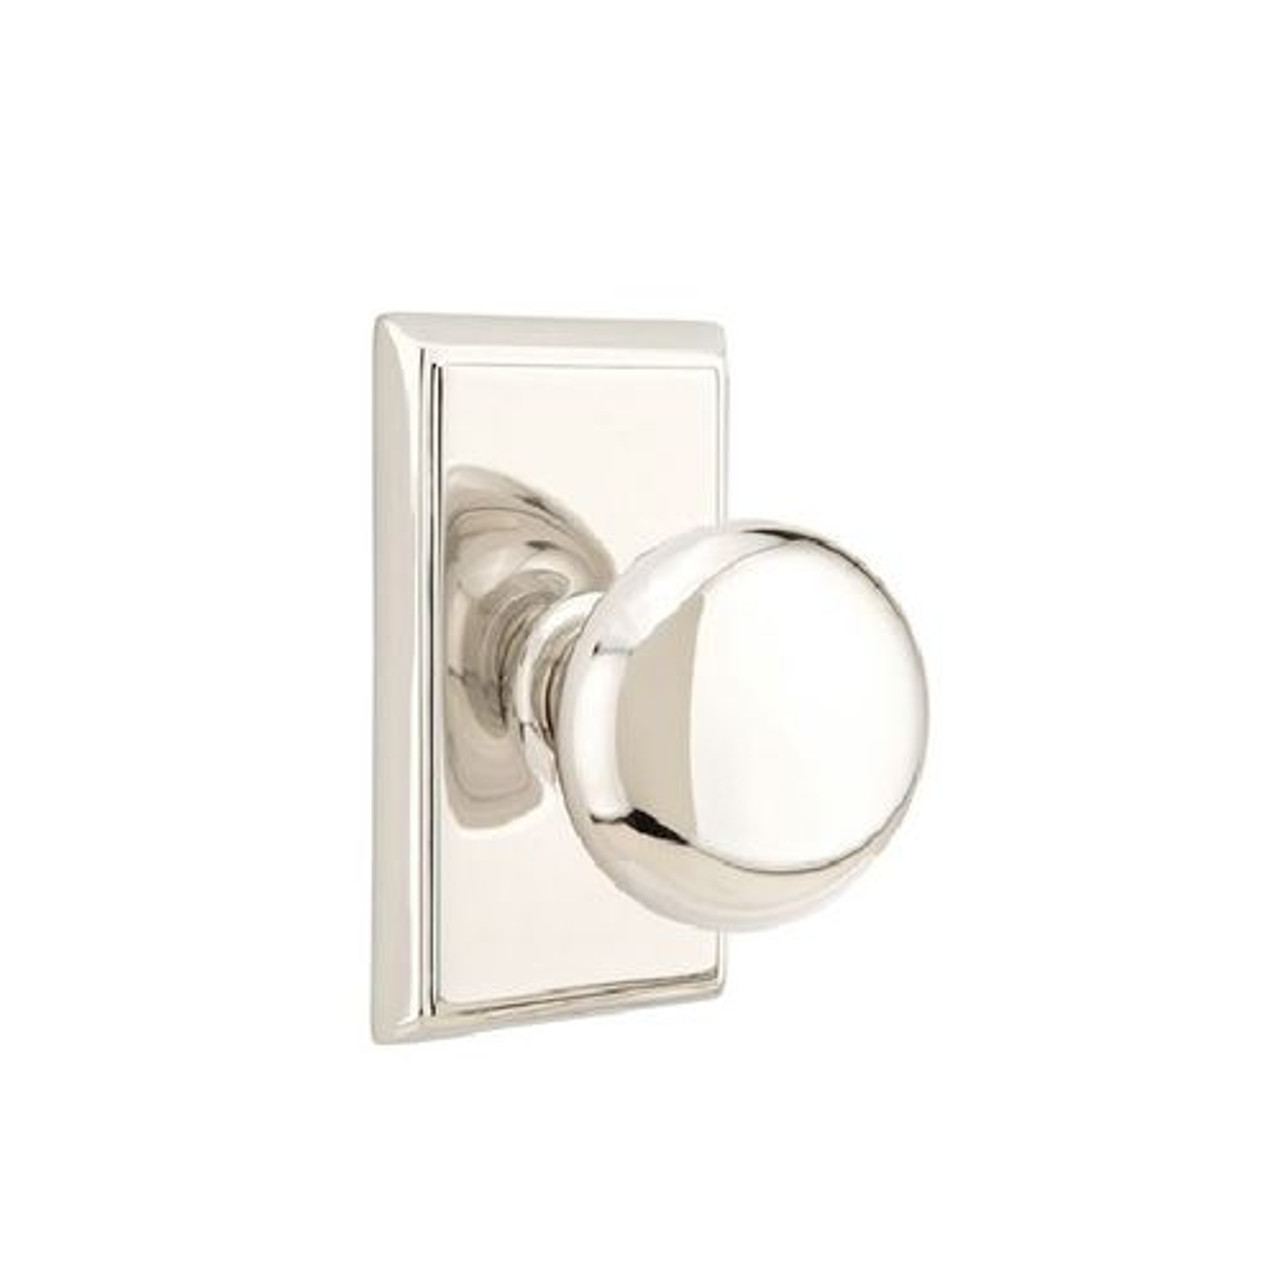 Emtek is dedicated to helping bring your personal style to life. Door  hardware is more than a way to open, close, and secure a space. To us, it  is an integral part